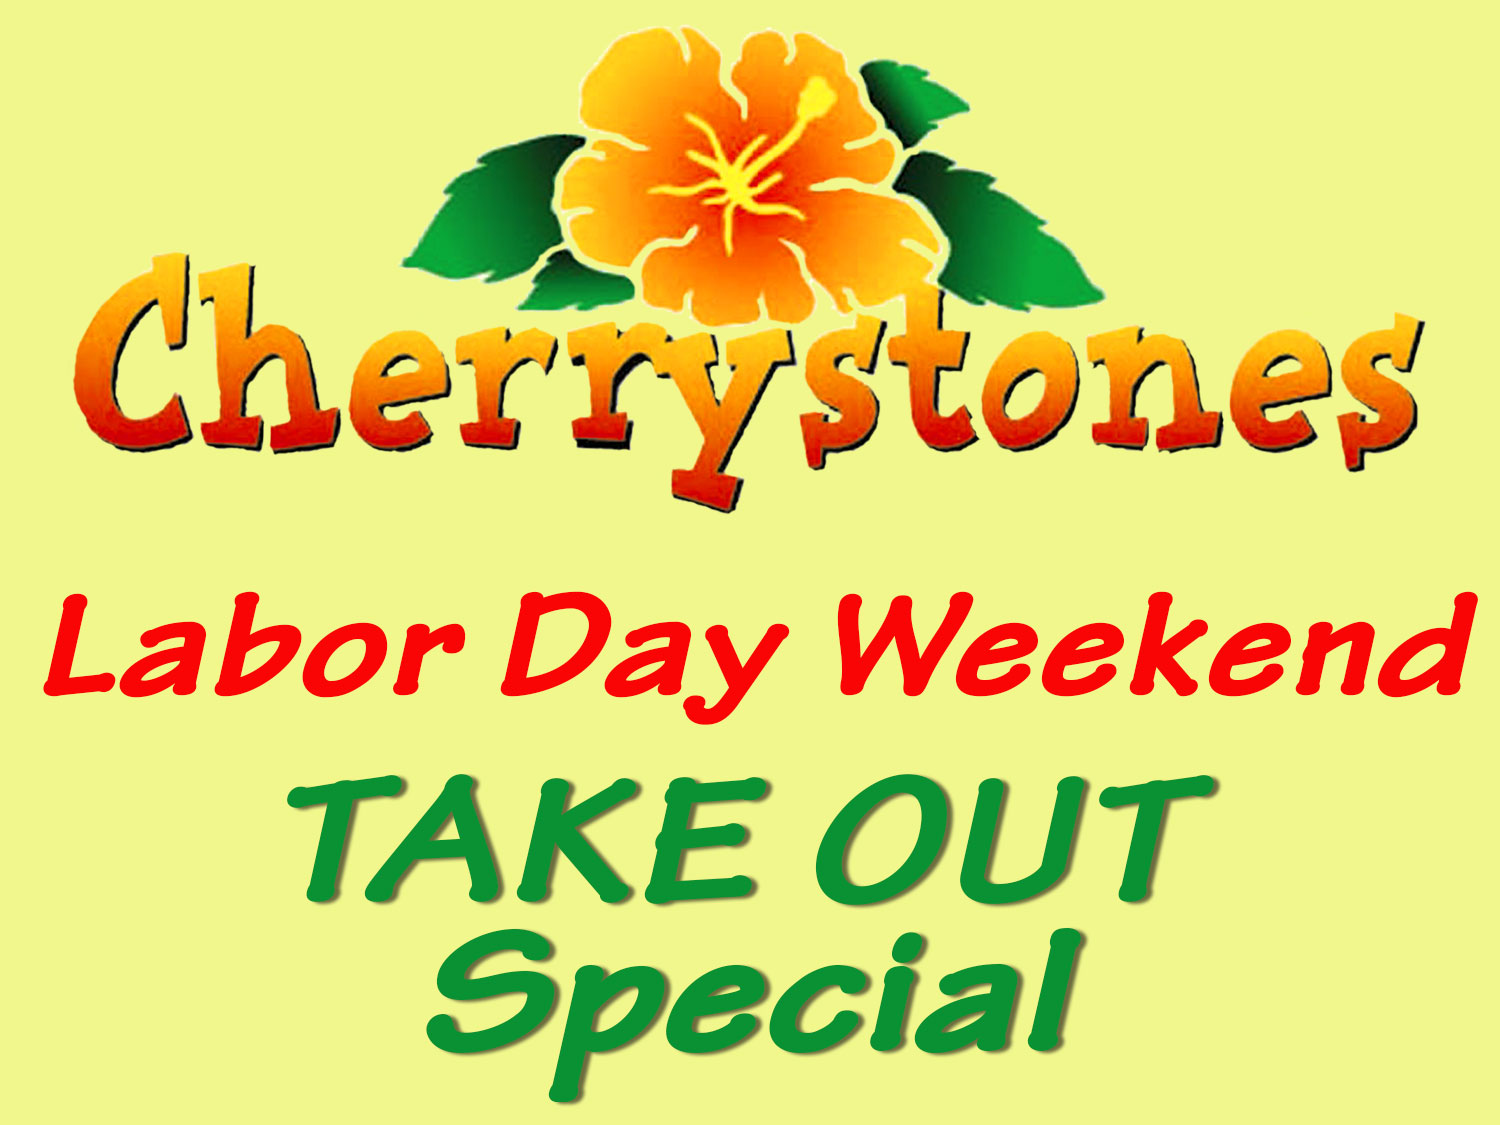 Cherrystones Labor Day Special's